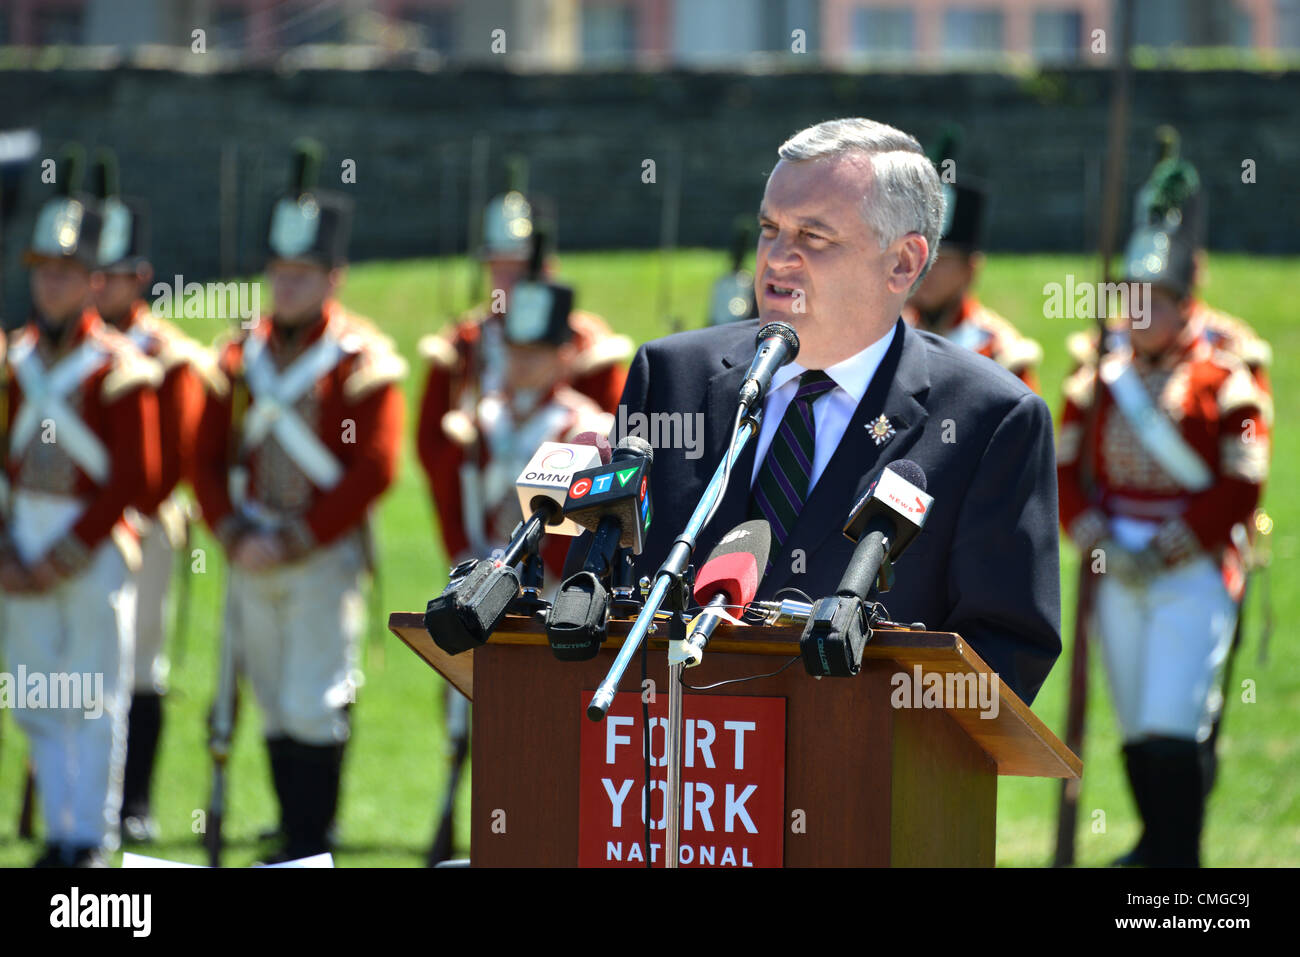 The Lieutenant Governor of Ontario David C. Onley speaking at Fort York, Toronto, Canada, commemorating the war of 1812 between Canada and America, and also Emancipation Day, marking the end of the slave trade in the British Empire in 1834. Stock Photo